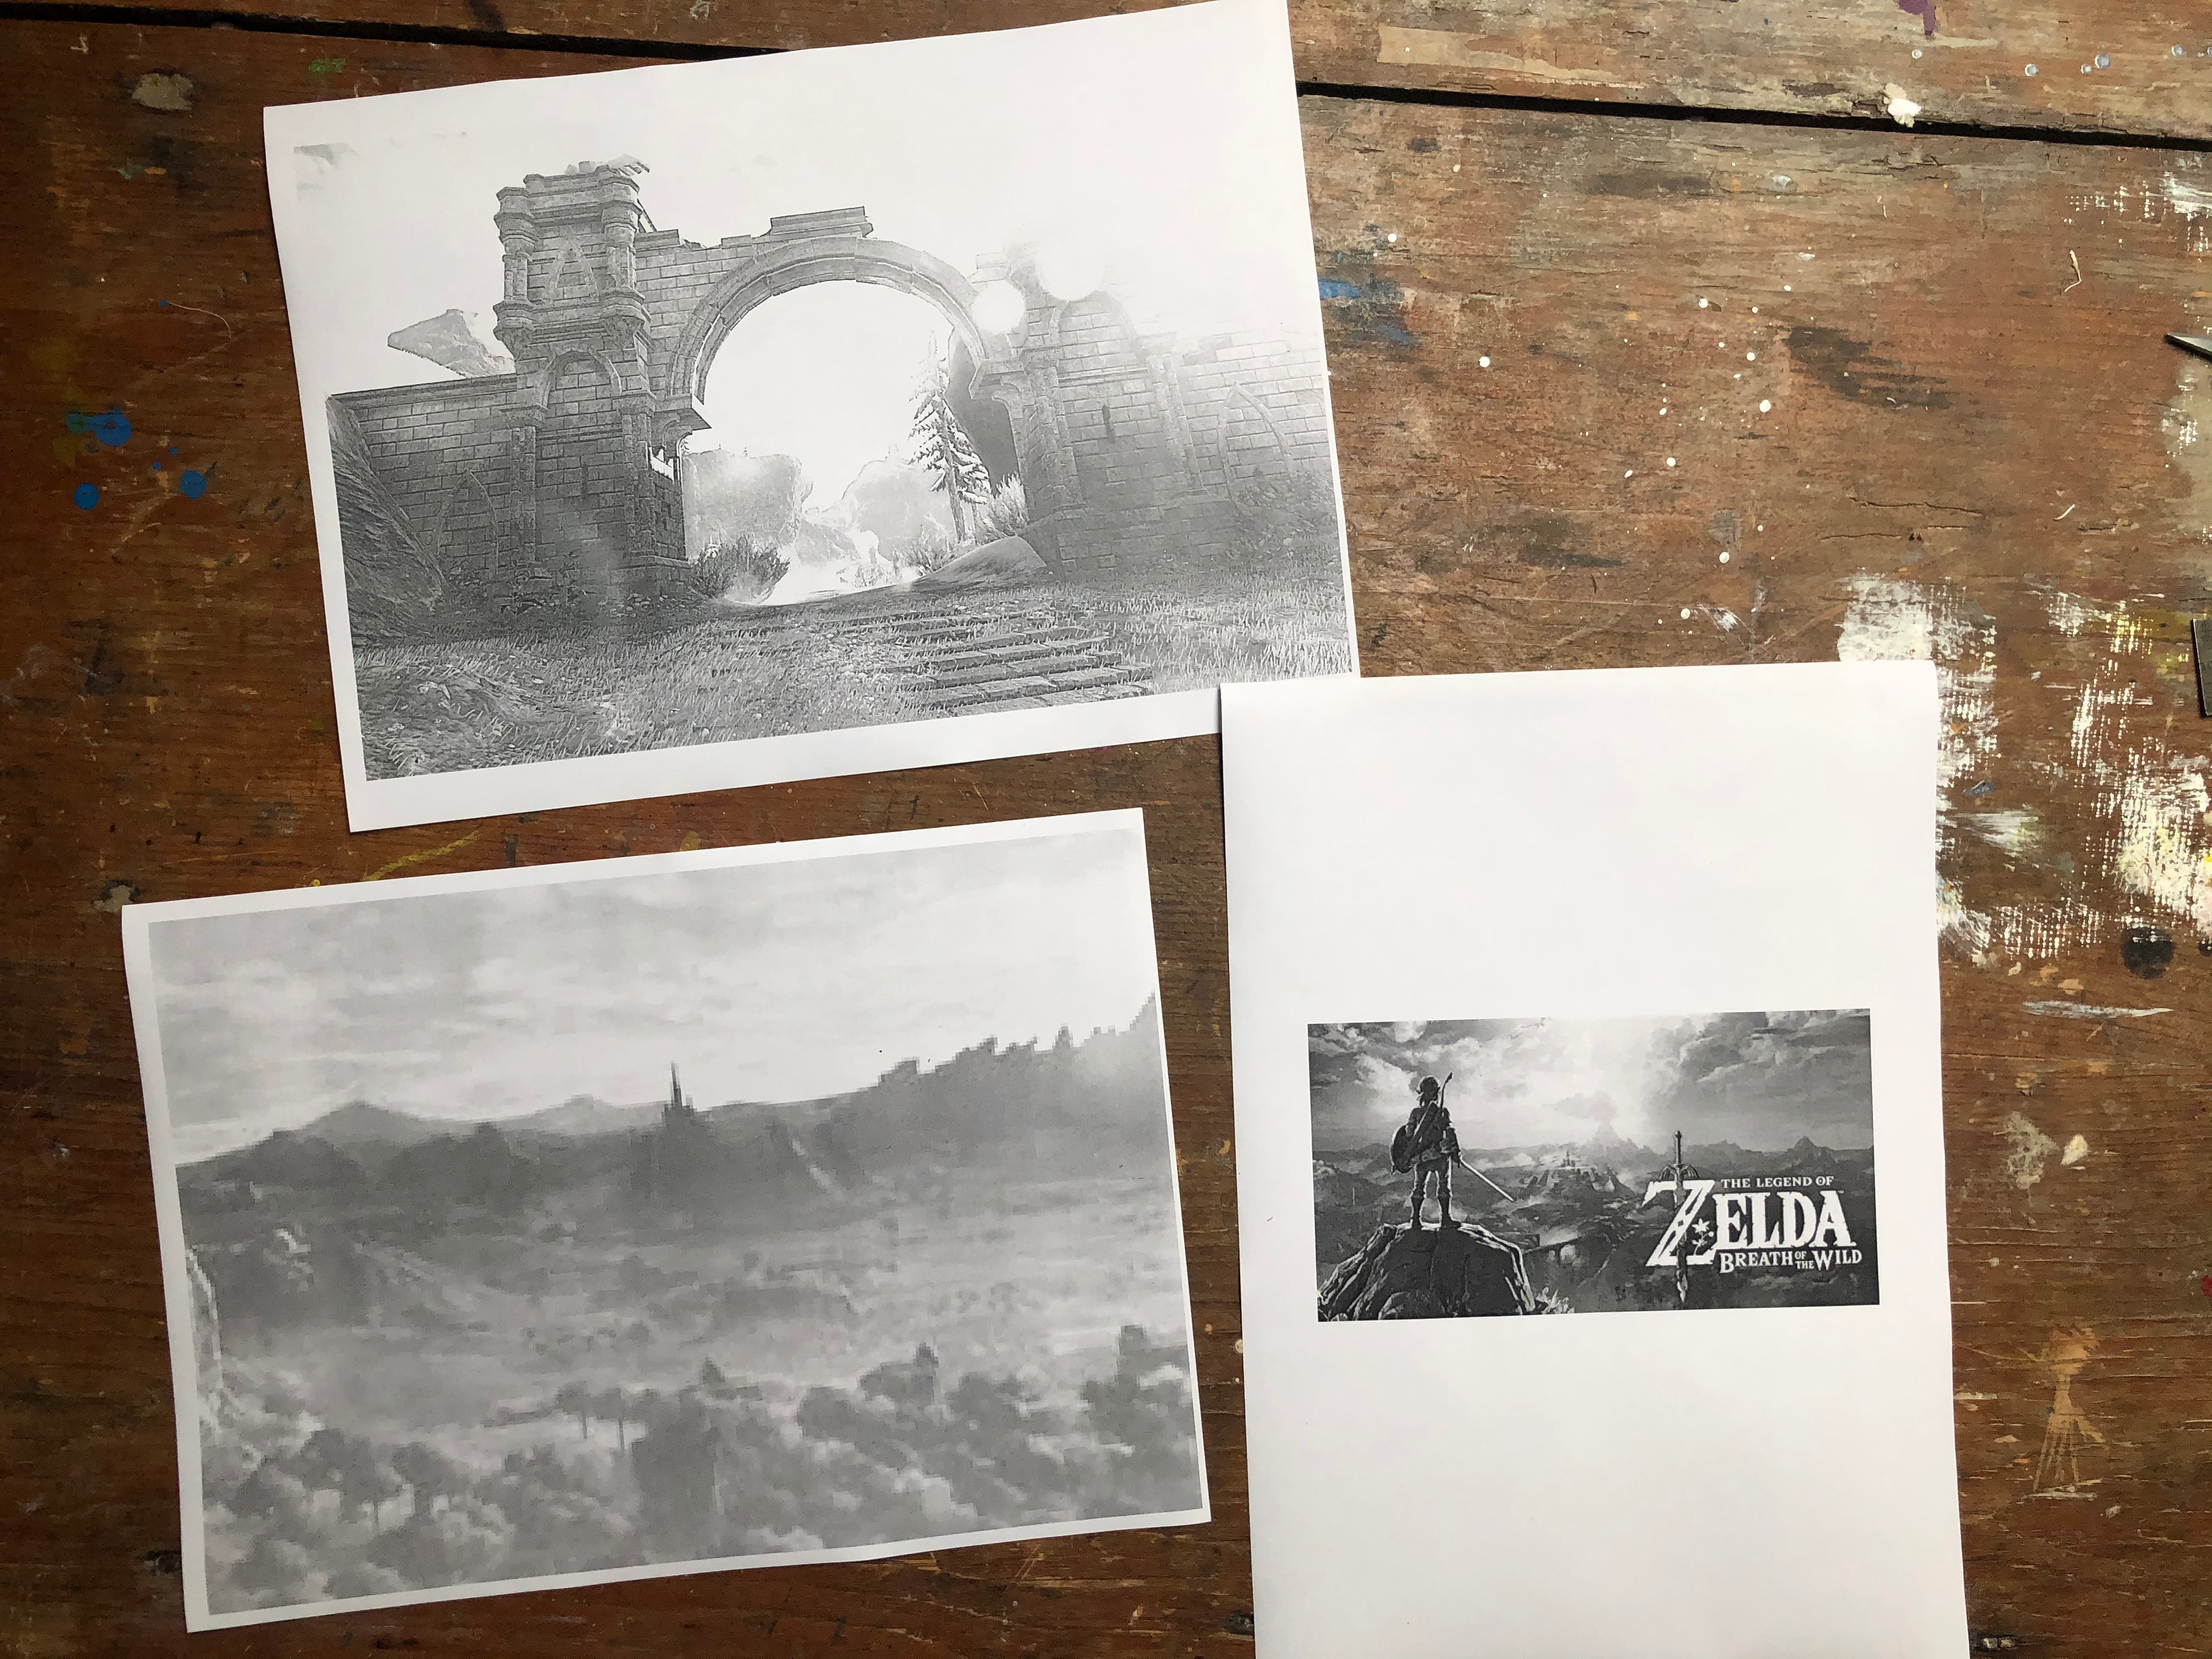 Printed out images from Zelda